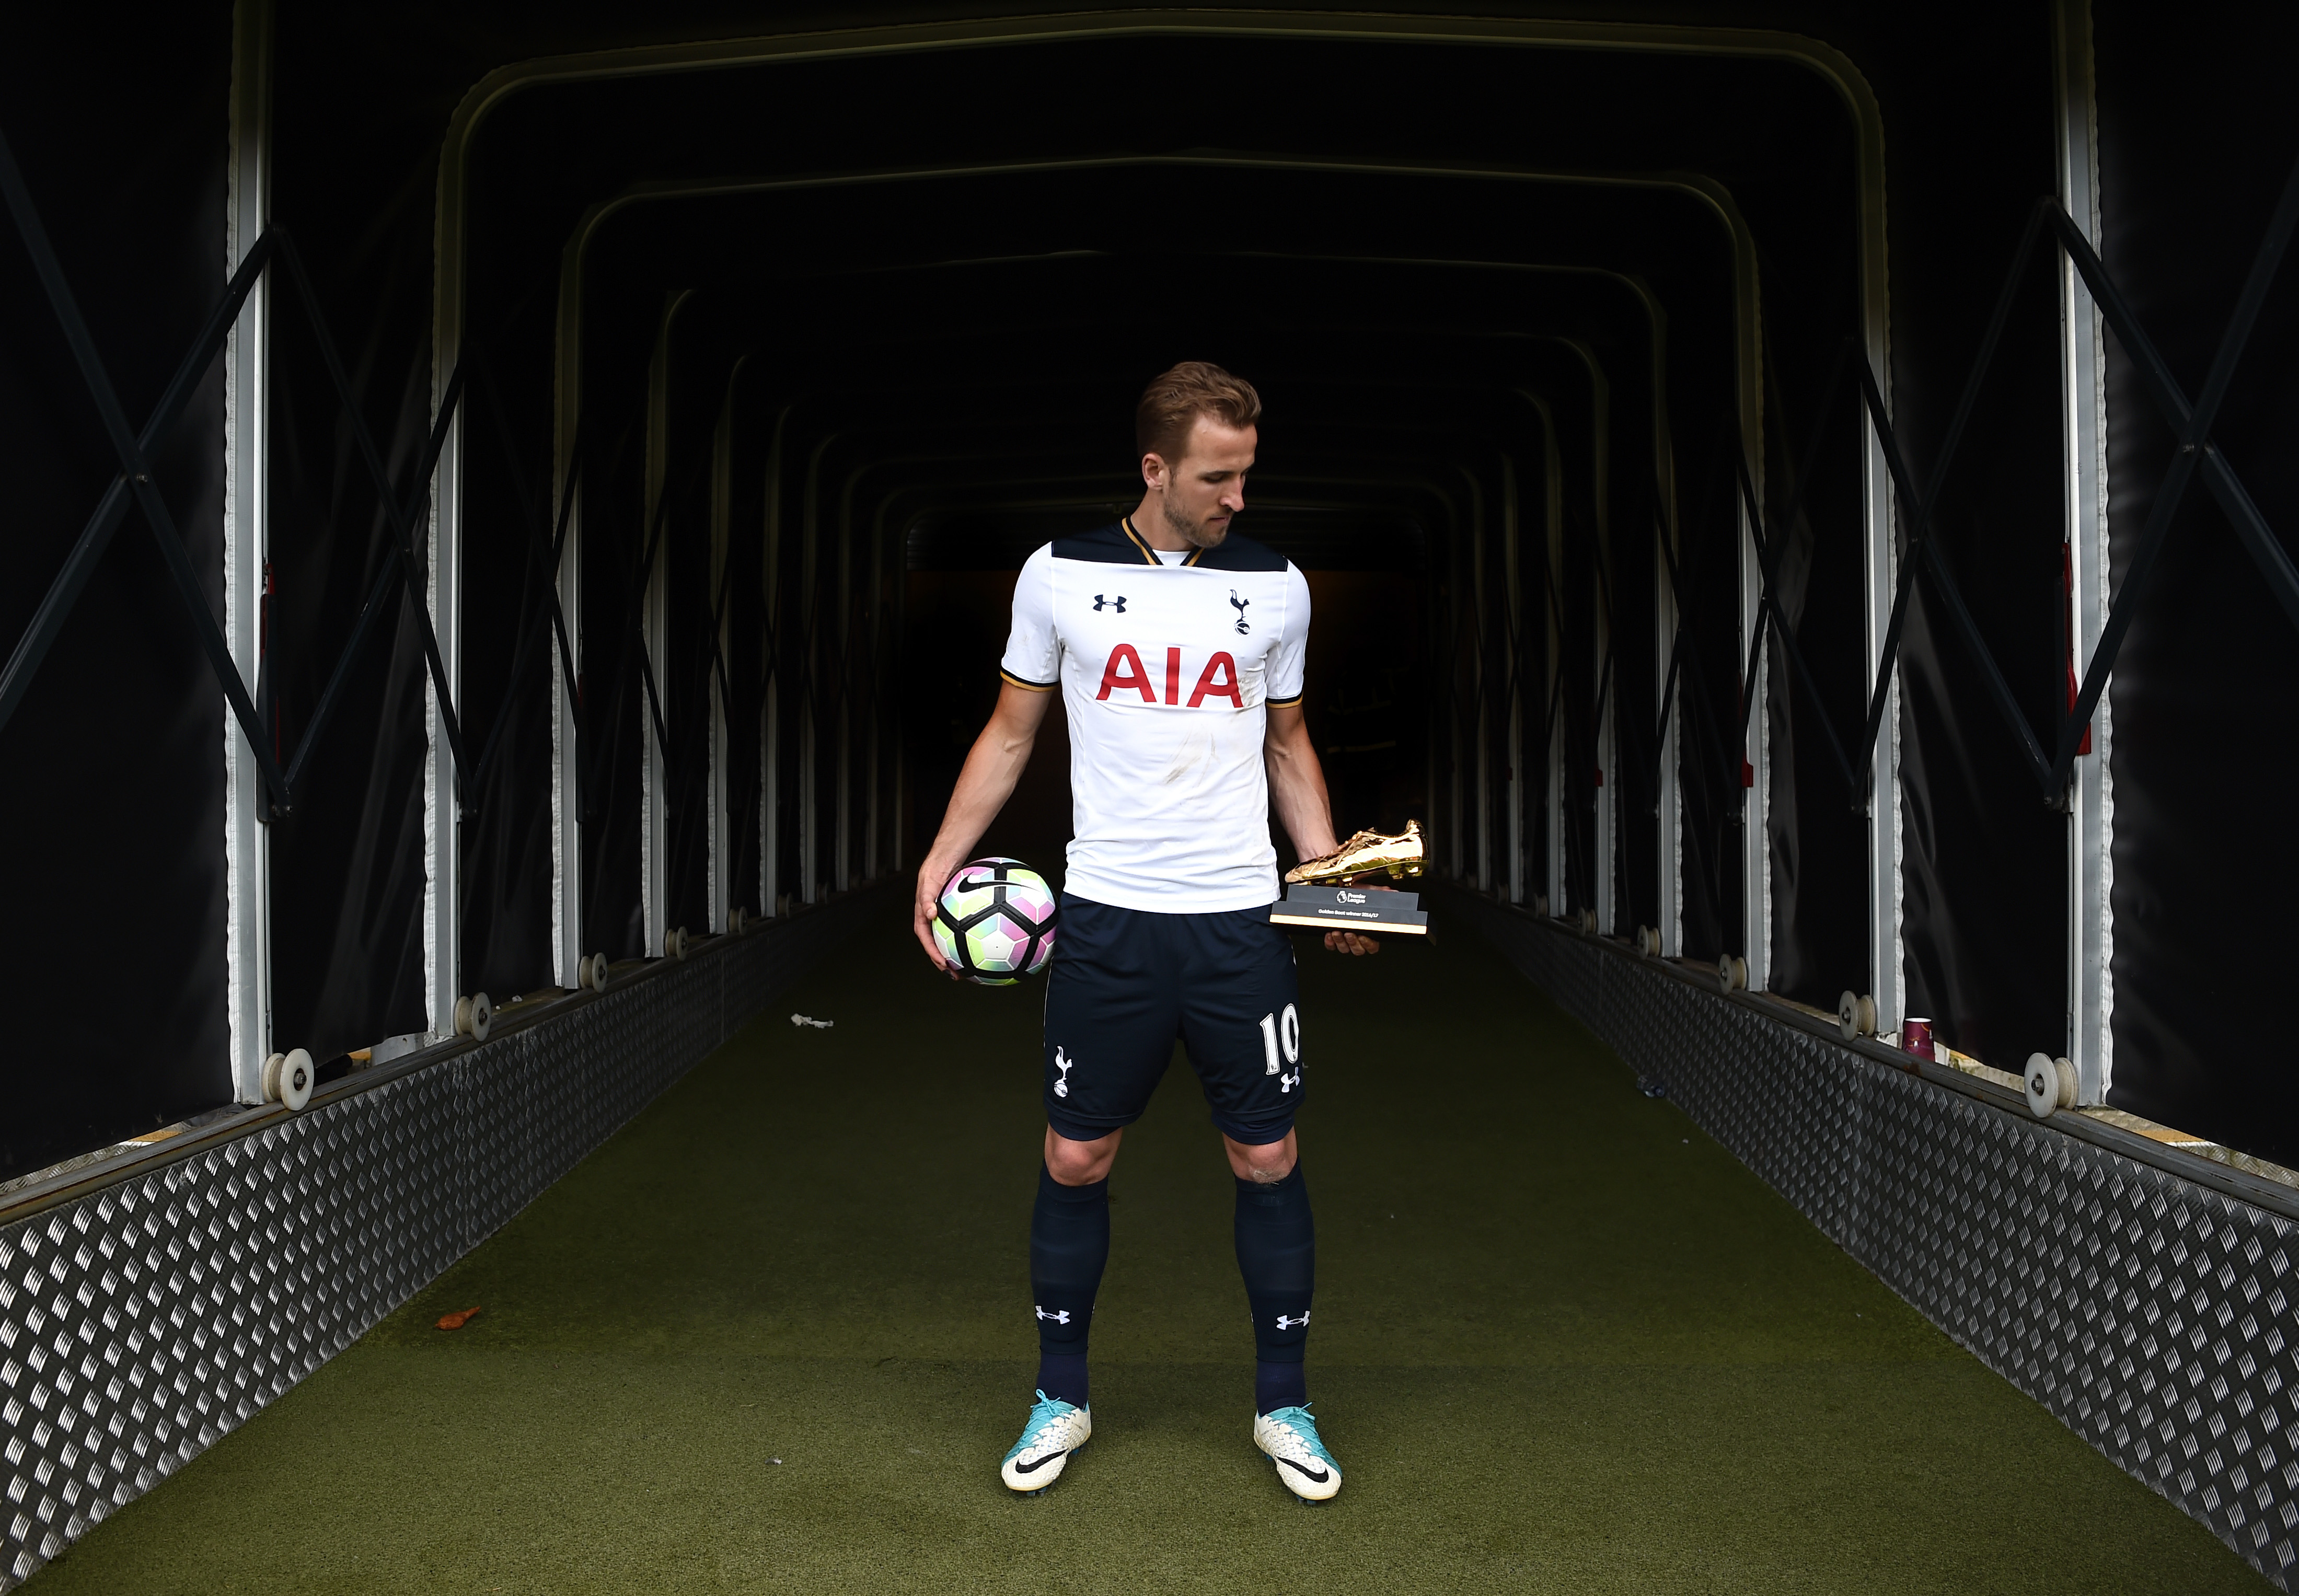 HULL, ENGLAND - MAY 21:  Harry Kane of Tottenham Hotspur poses in the tunnel with the golden boot and match ball after the Premier League match between Hull City and Tottenham Hotspur at KC Stadium on May 21, 2017 in Hull, England.  (Photo by Laurence Griffiths/Getty Images)